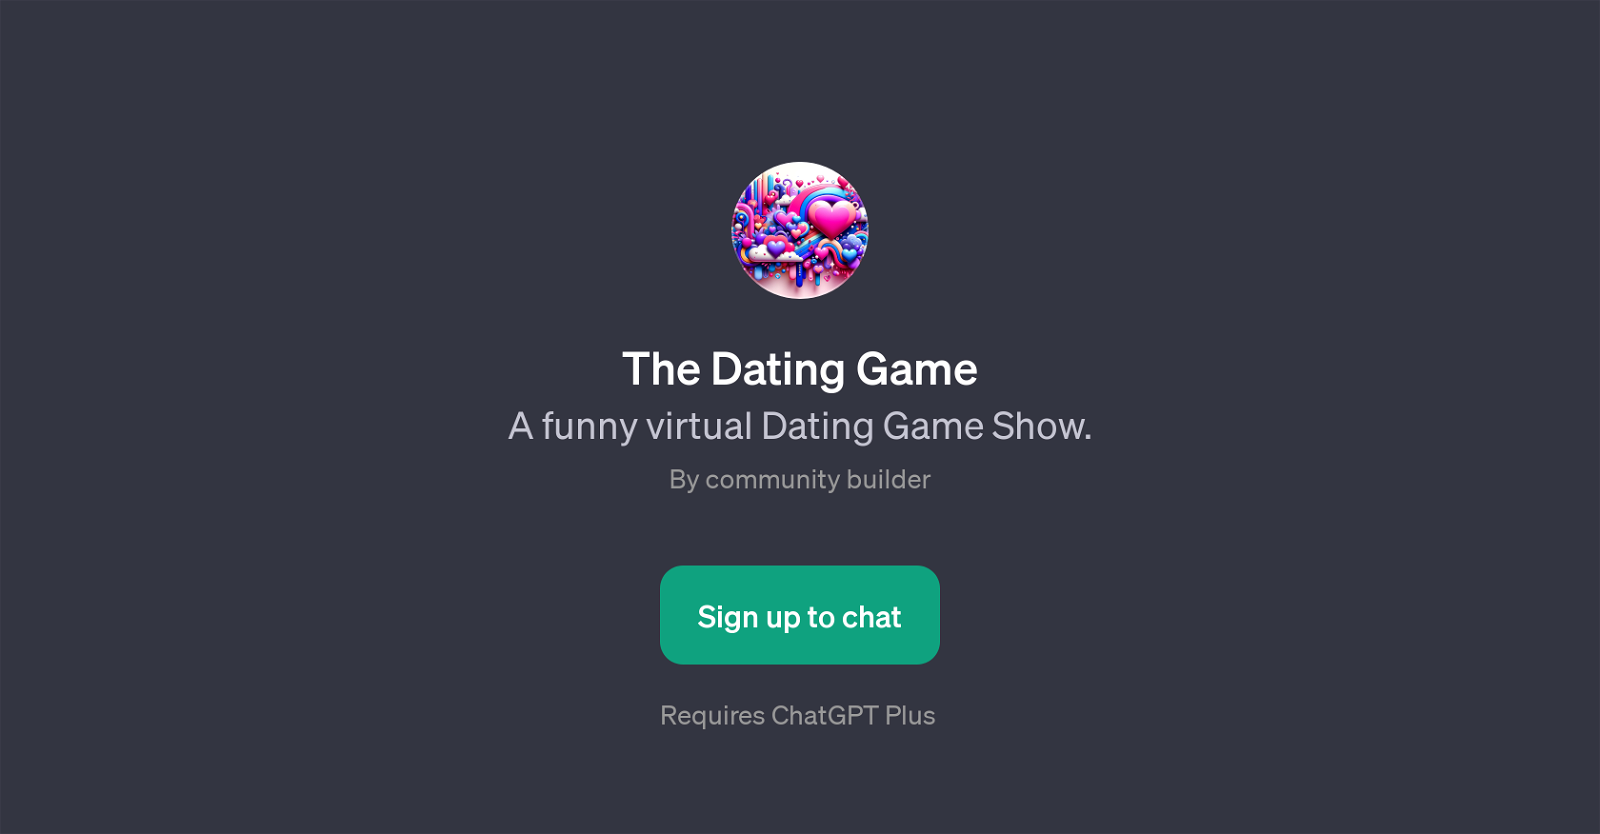 The Dating Game website